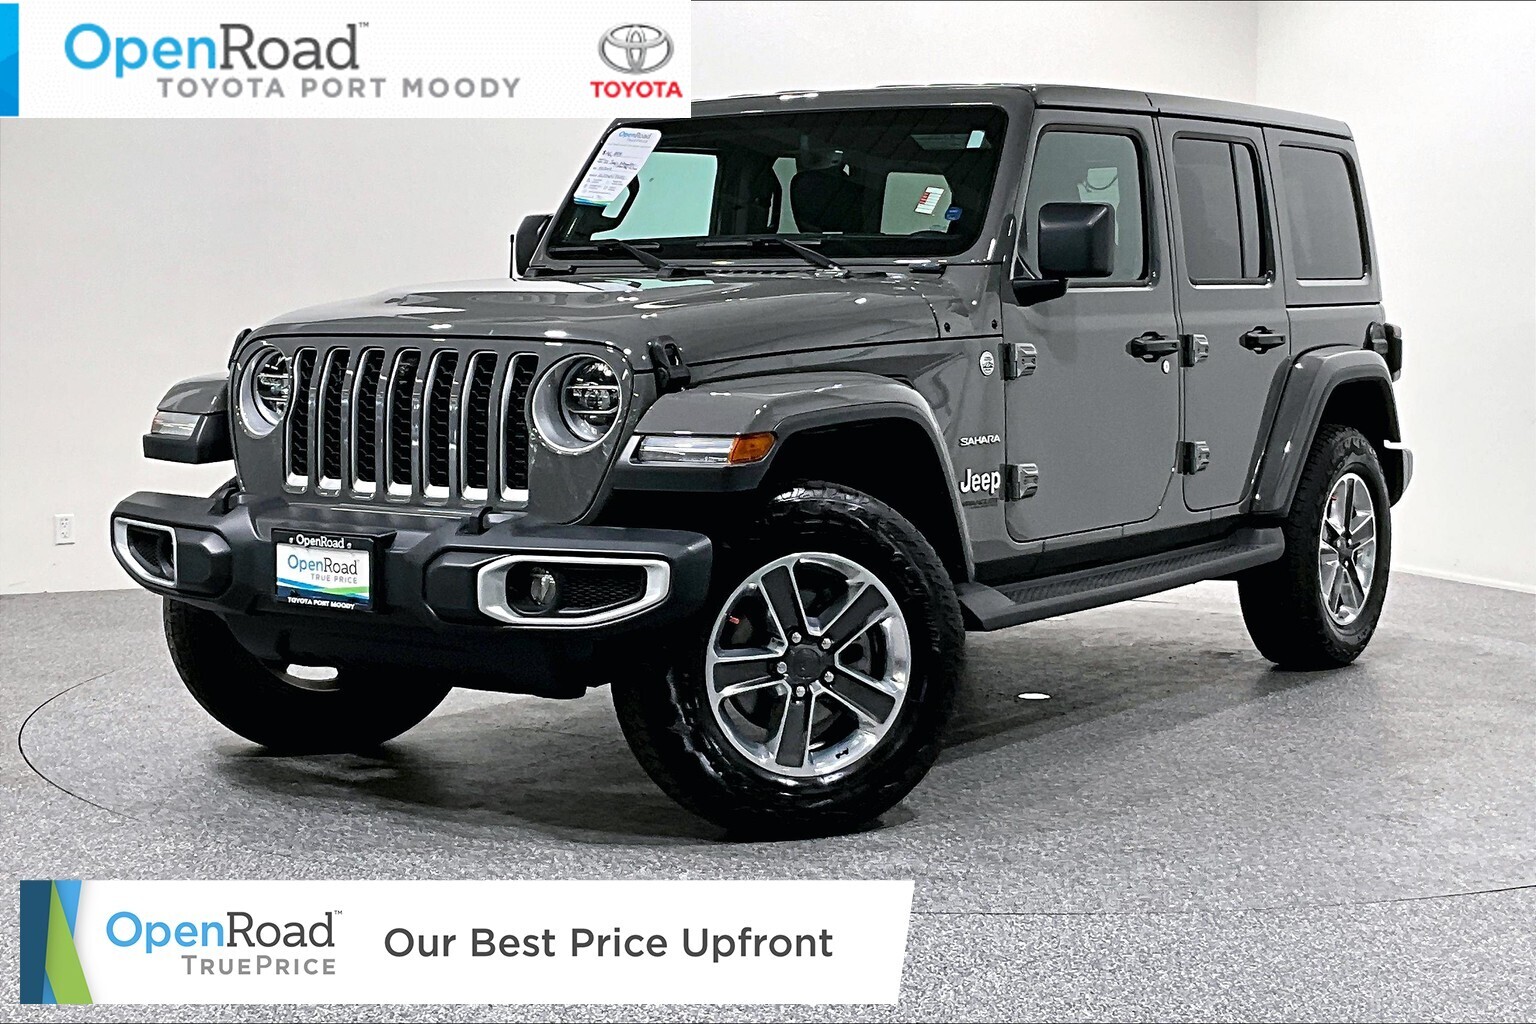 2021 Jeep WRANGLER UNLIMITED Sahara |OpenRoad True Price |Local |One Owner |Ser